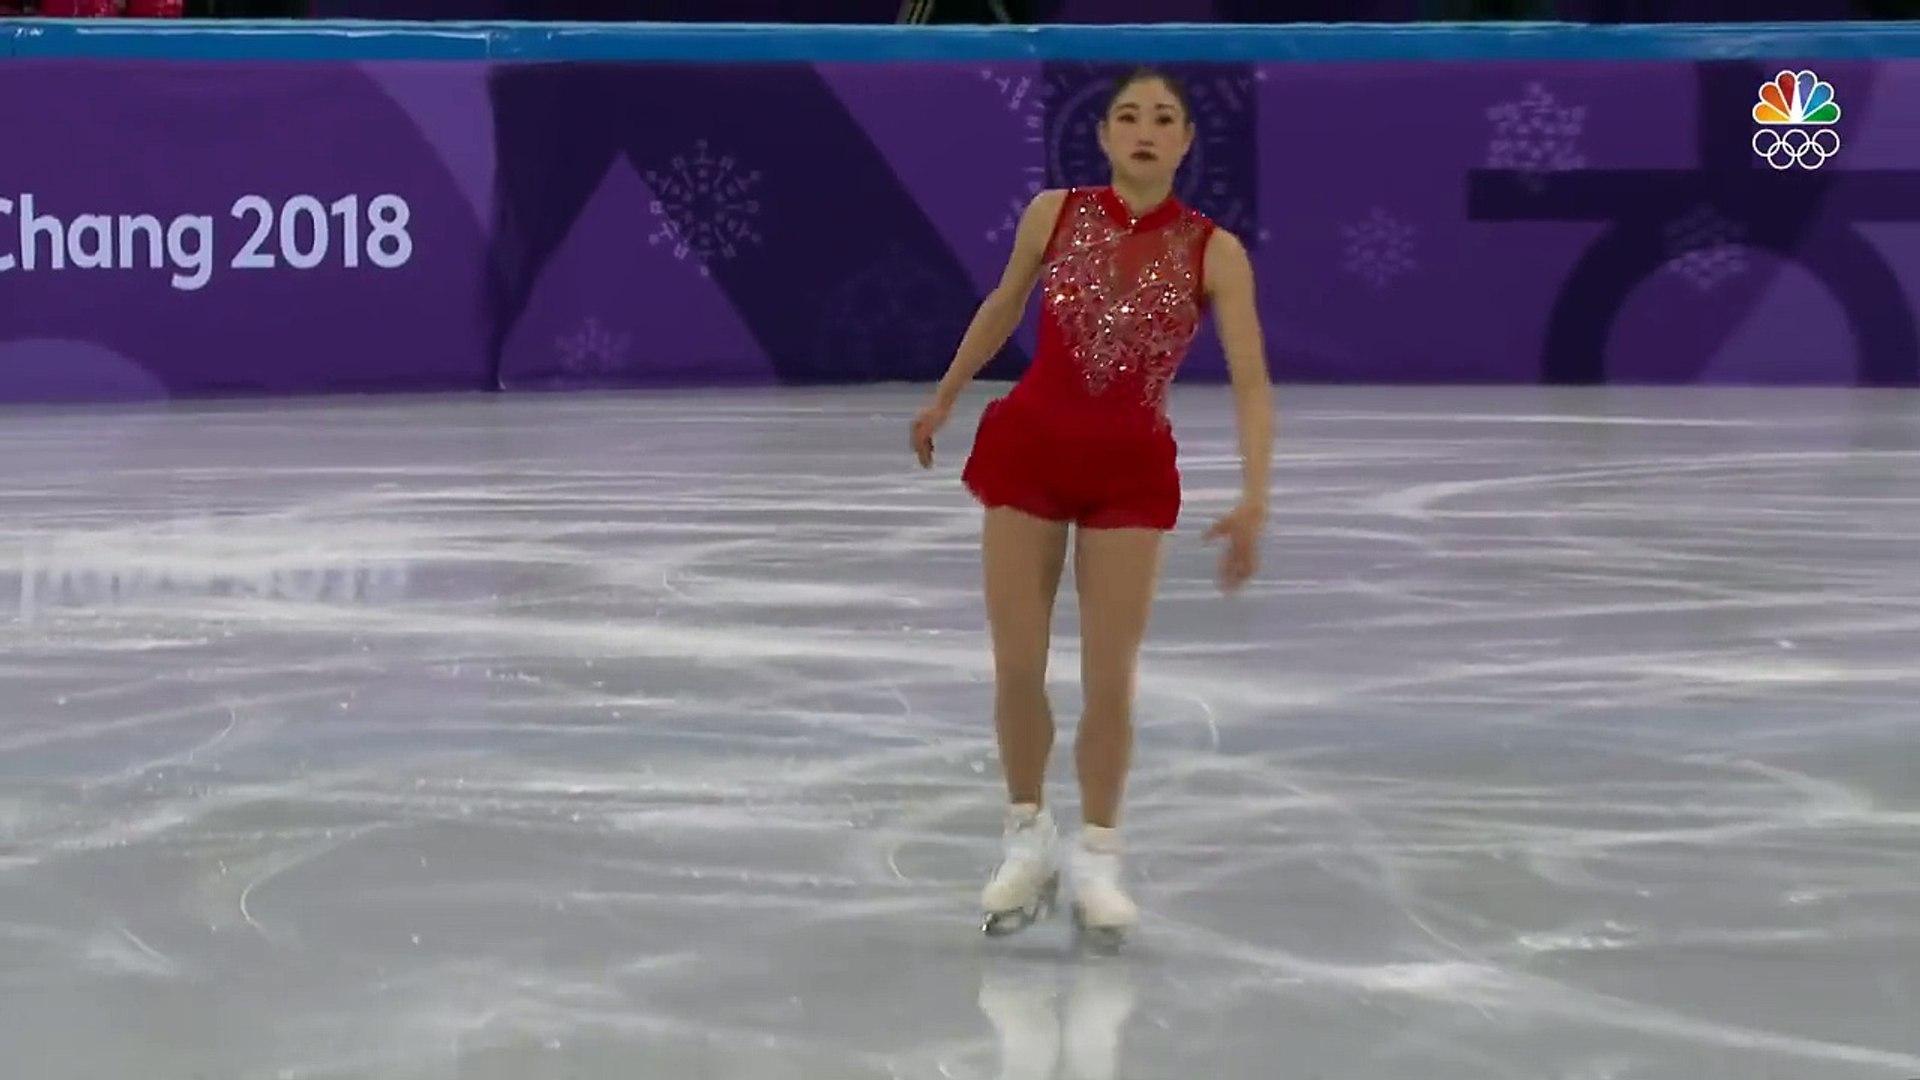 Mirai Nagasu is the first U S woman to land a triple Axel at the Olympics